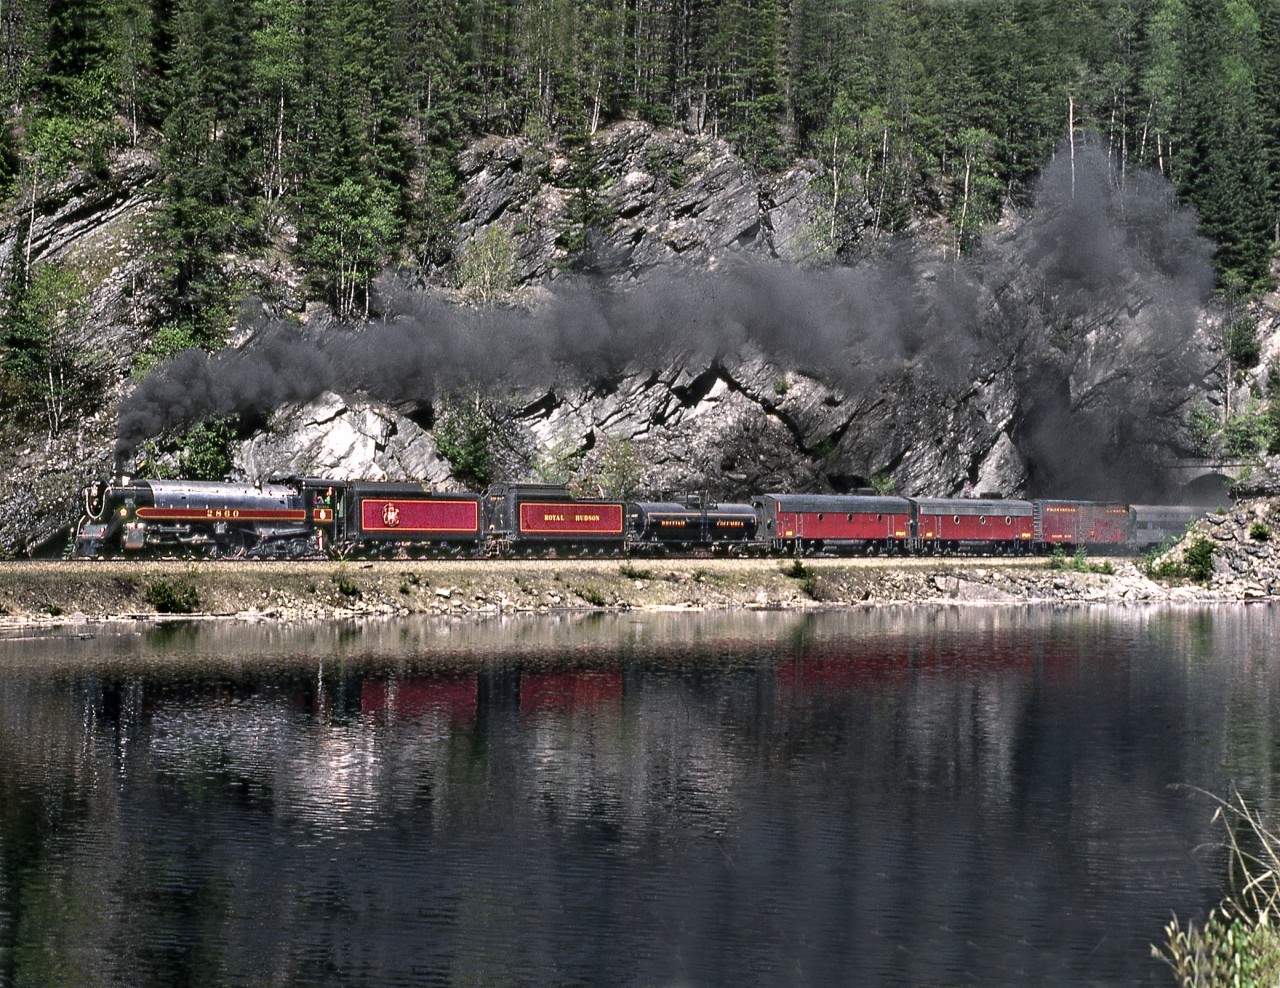 Provincially owned ex CP Royal Hudson 2860,returning from a tourist promotion tour of the U.S. west coast summits Eagle Pass of the Monashee Mountains west of Revelstoke.